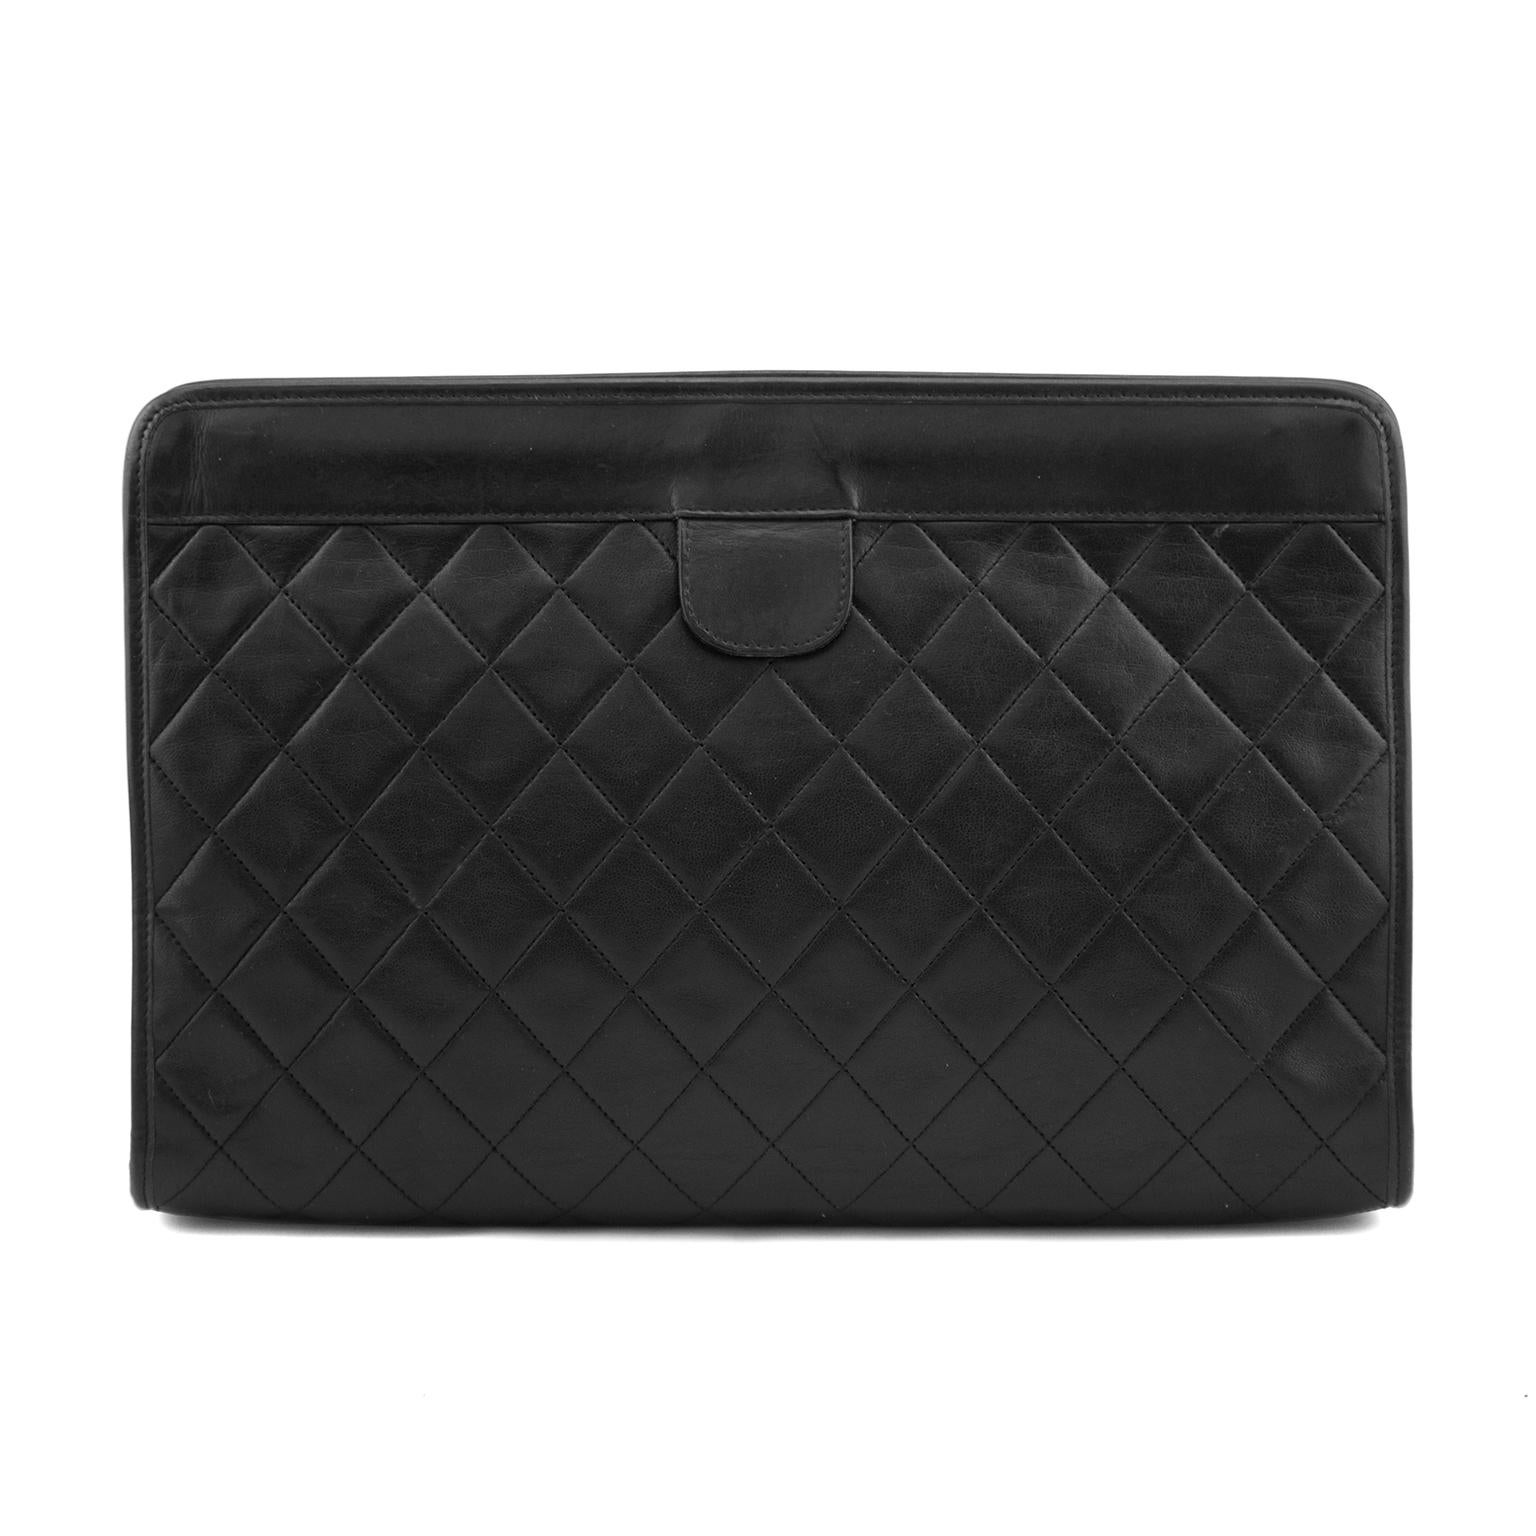 Chanel Black Quilted Lambskin Leather Portfolio Clutch Bag In Good Condition In Toronto, Ontario